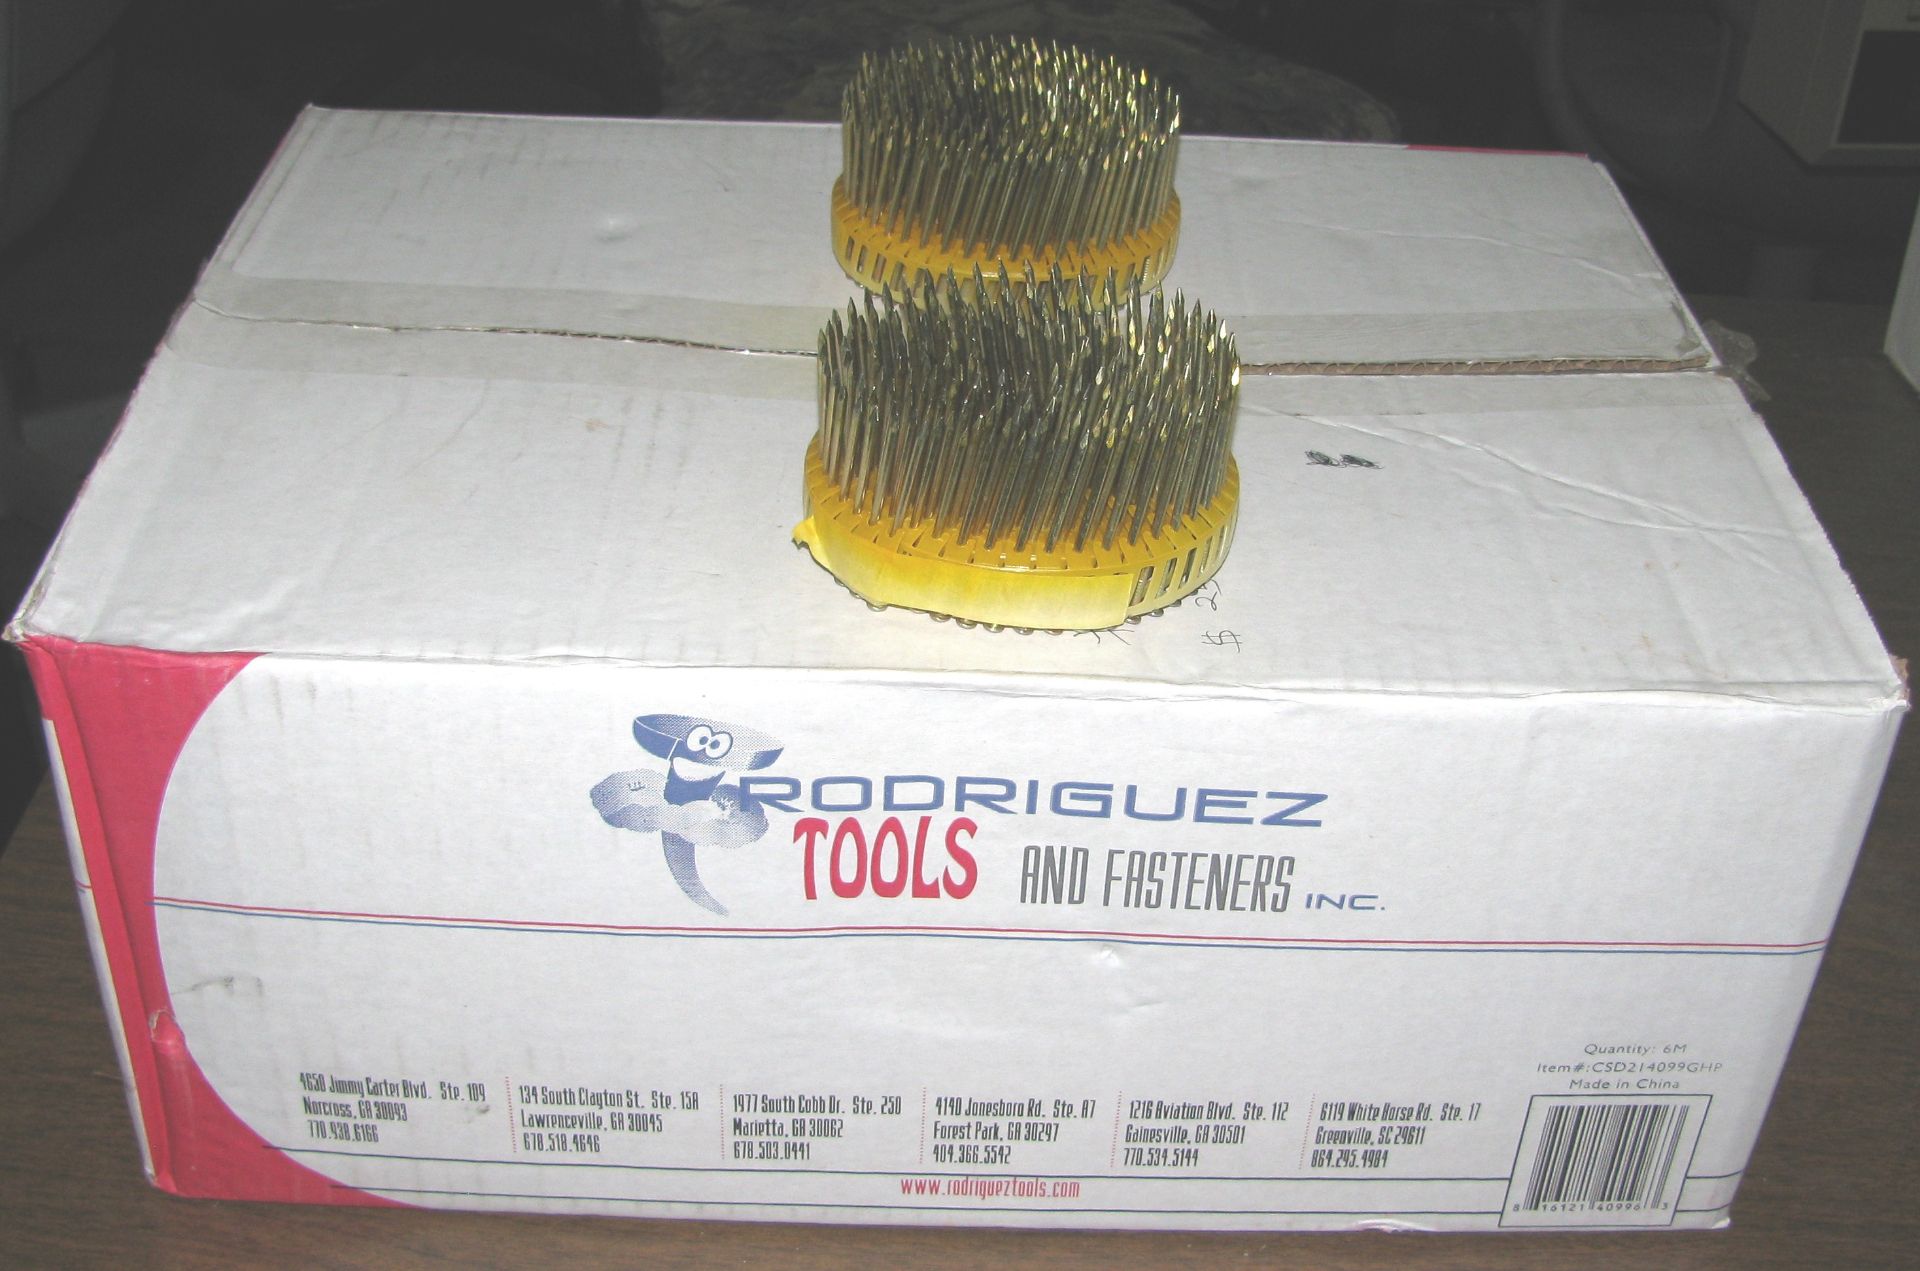 RODRIGUEZ TOOLS AND FASTENERS INC